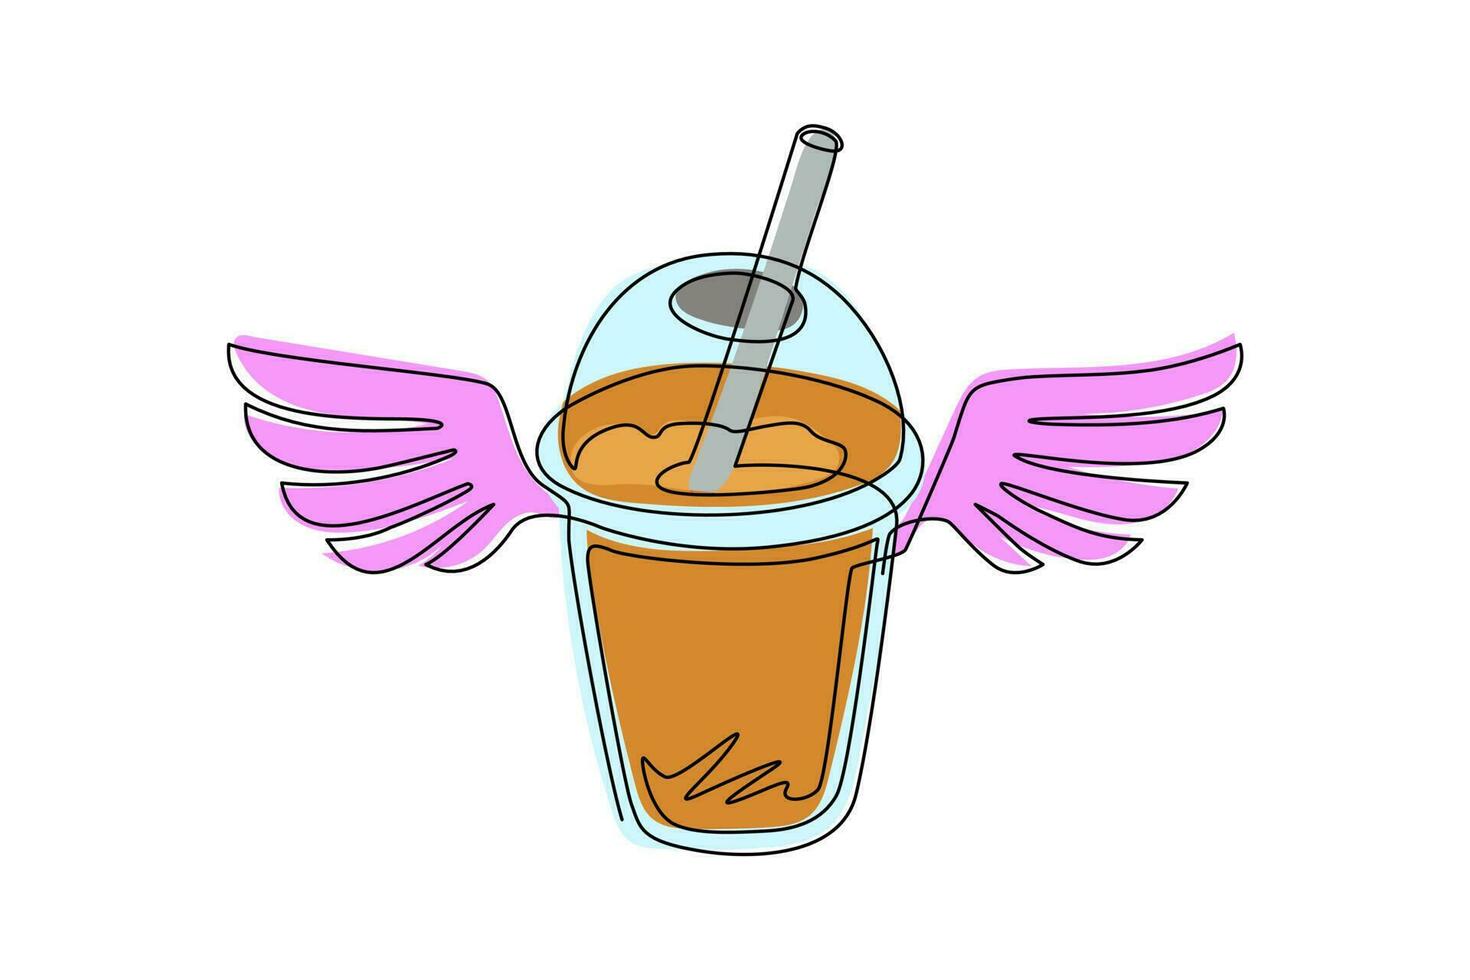 Single one line drawing bubble boba tea drink with wings. Food in doodle cartoon linear style. For flyer, sticker, card, logo, icon, print, poster. Modern continuous line draw design graphic vector